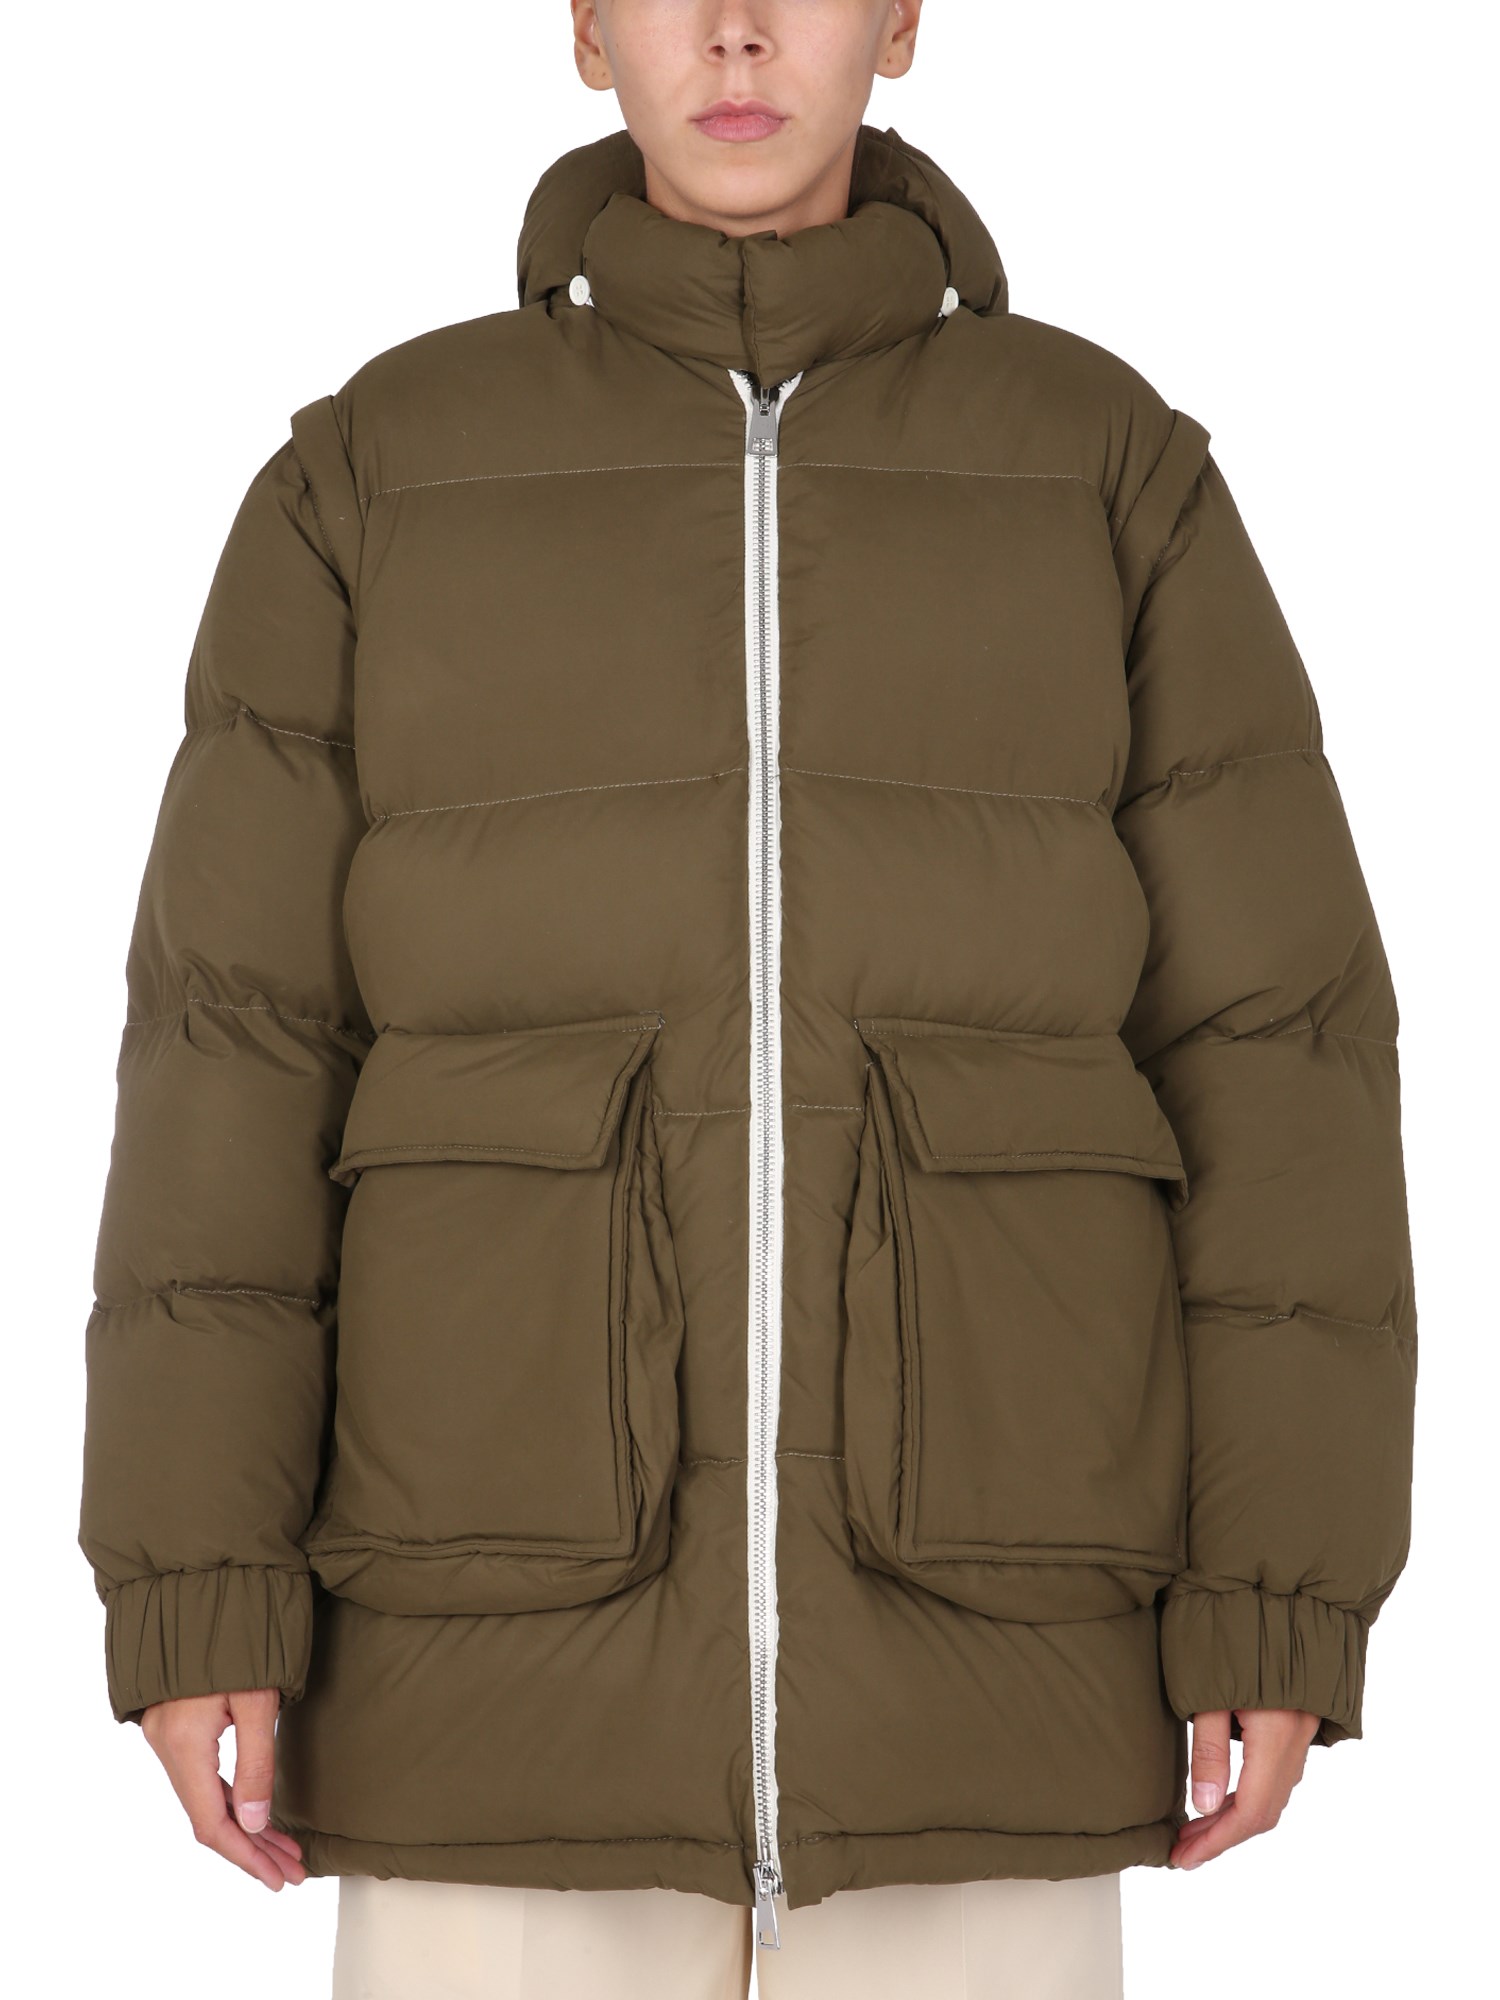 sunnei x eleonora bonucci sunnei x eleonora bonucci "puffy" down jacket